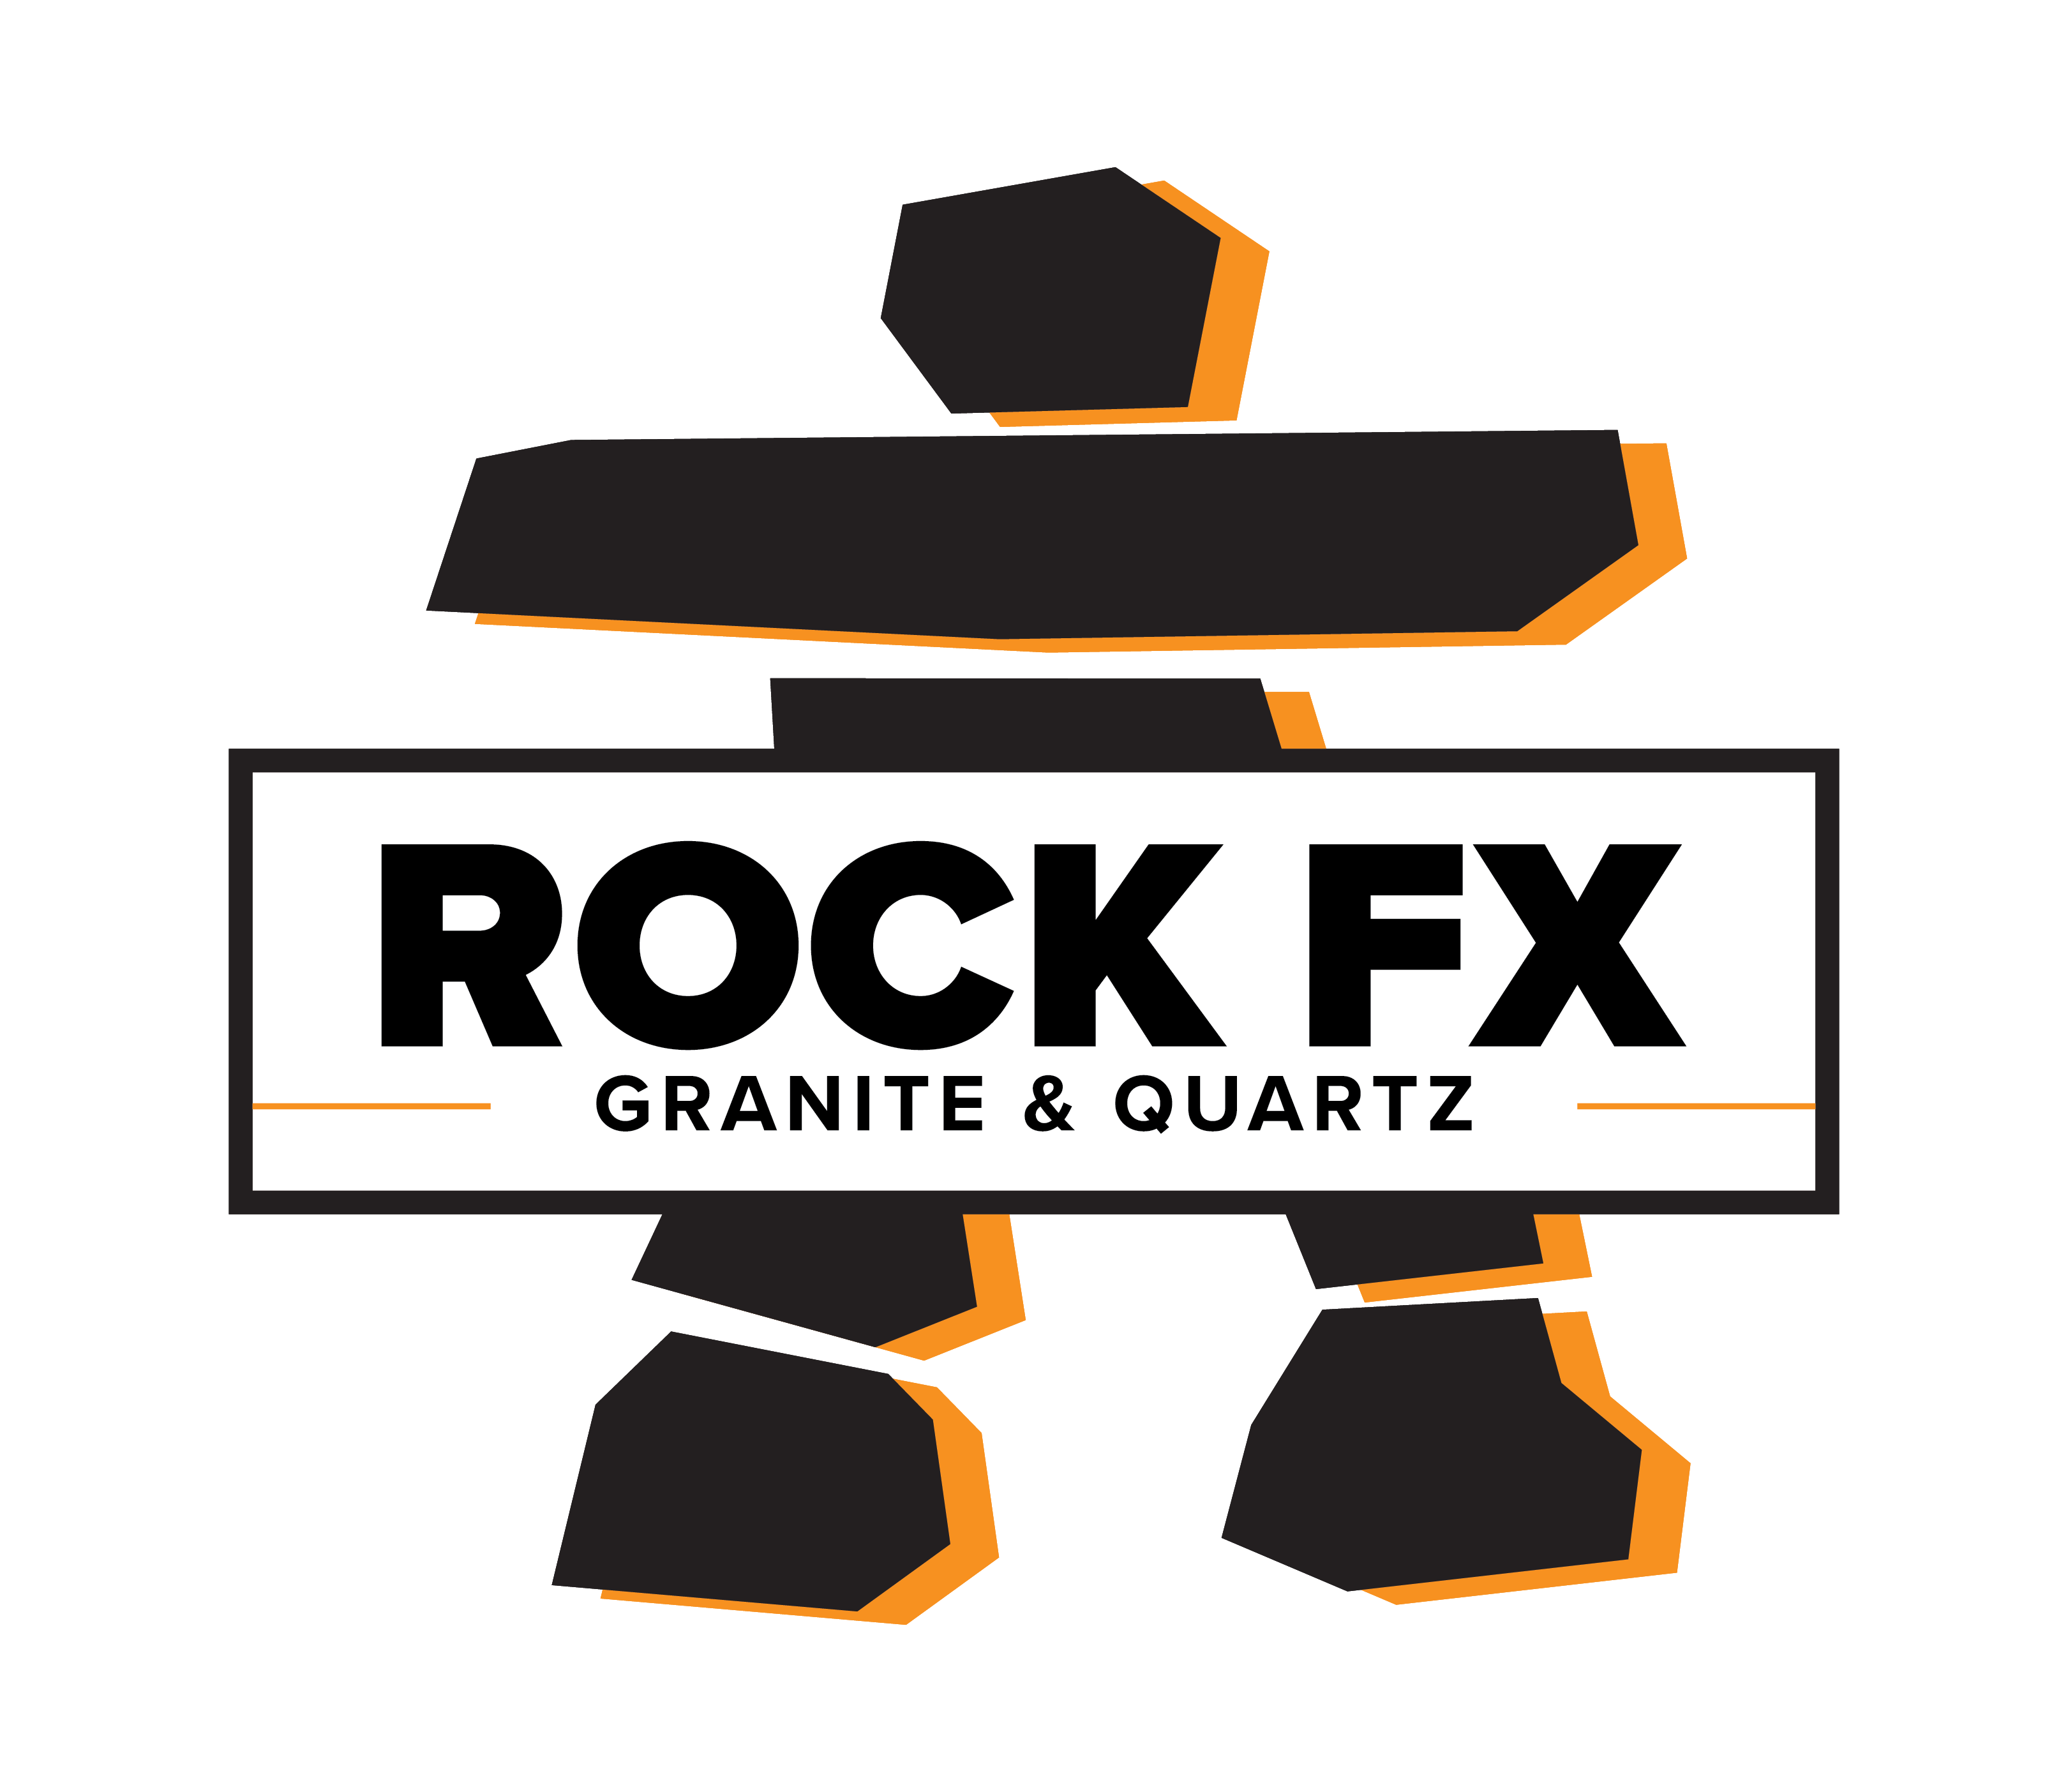 Rock FX logo with the business name appearing over a black and modern Inukshuk